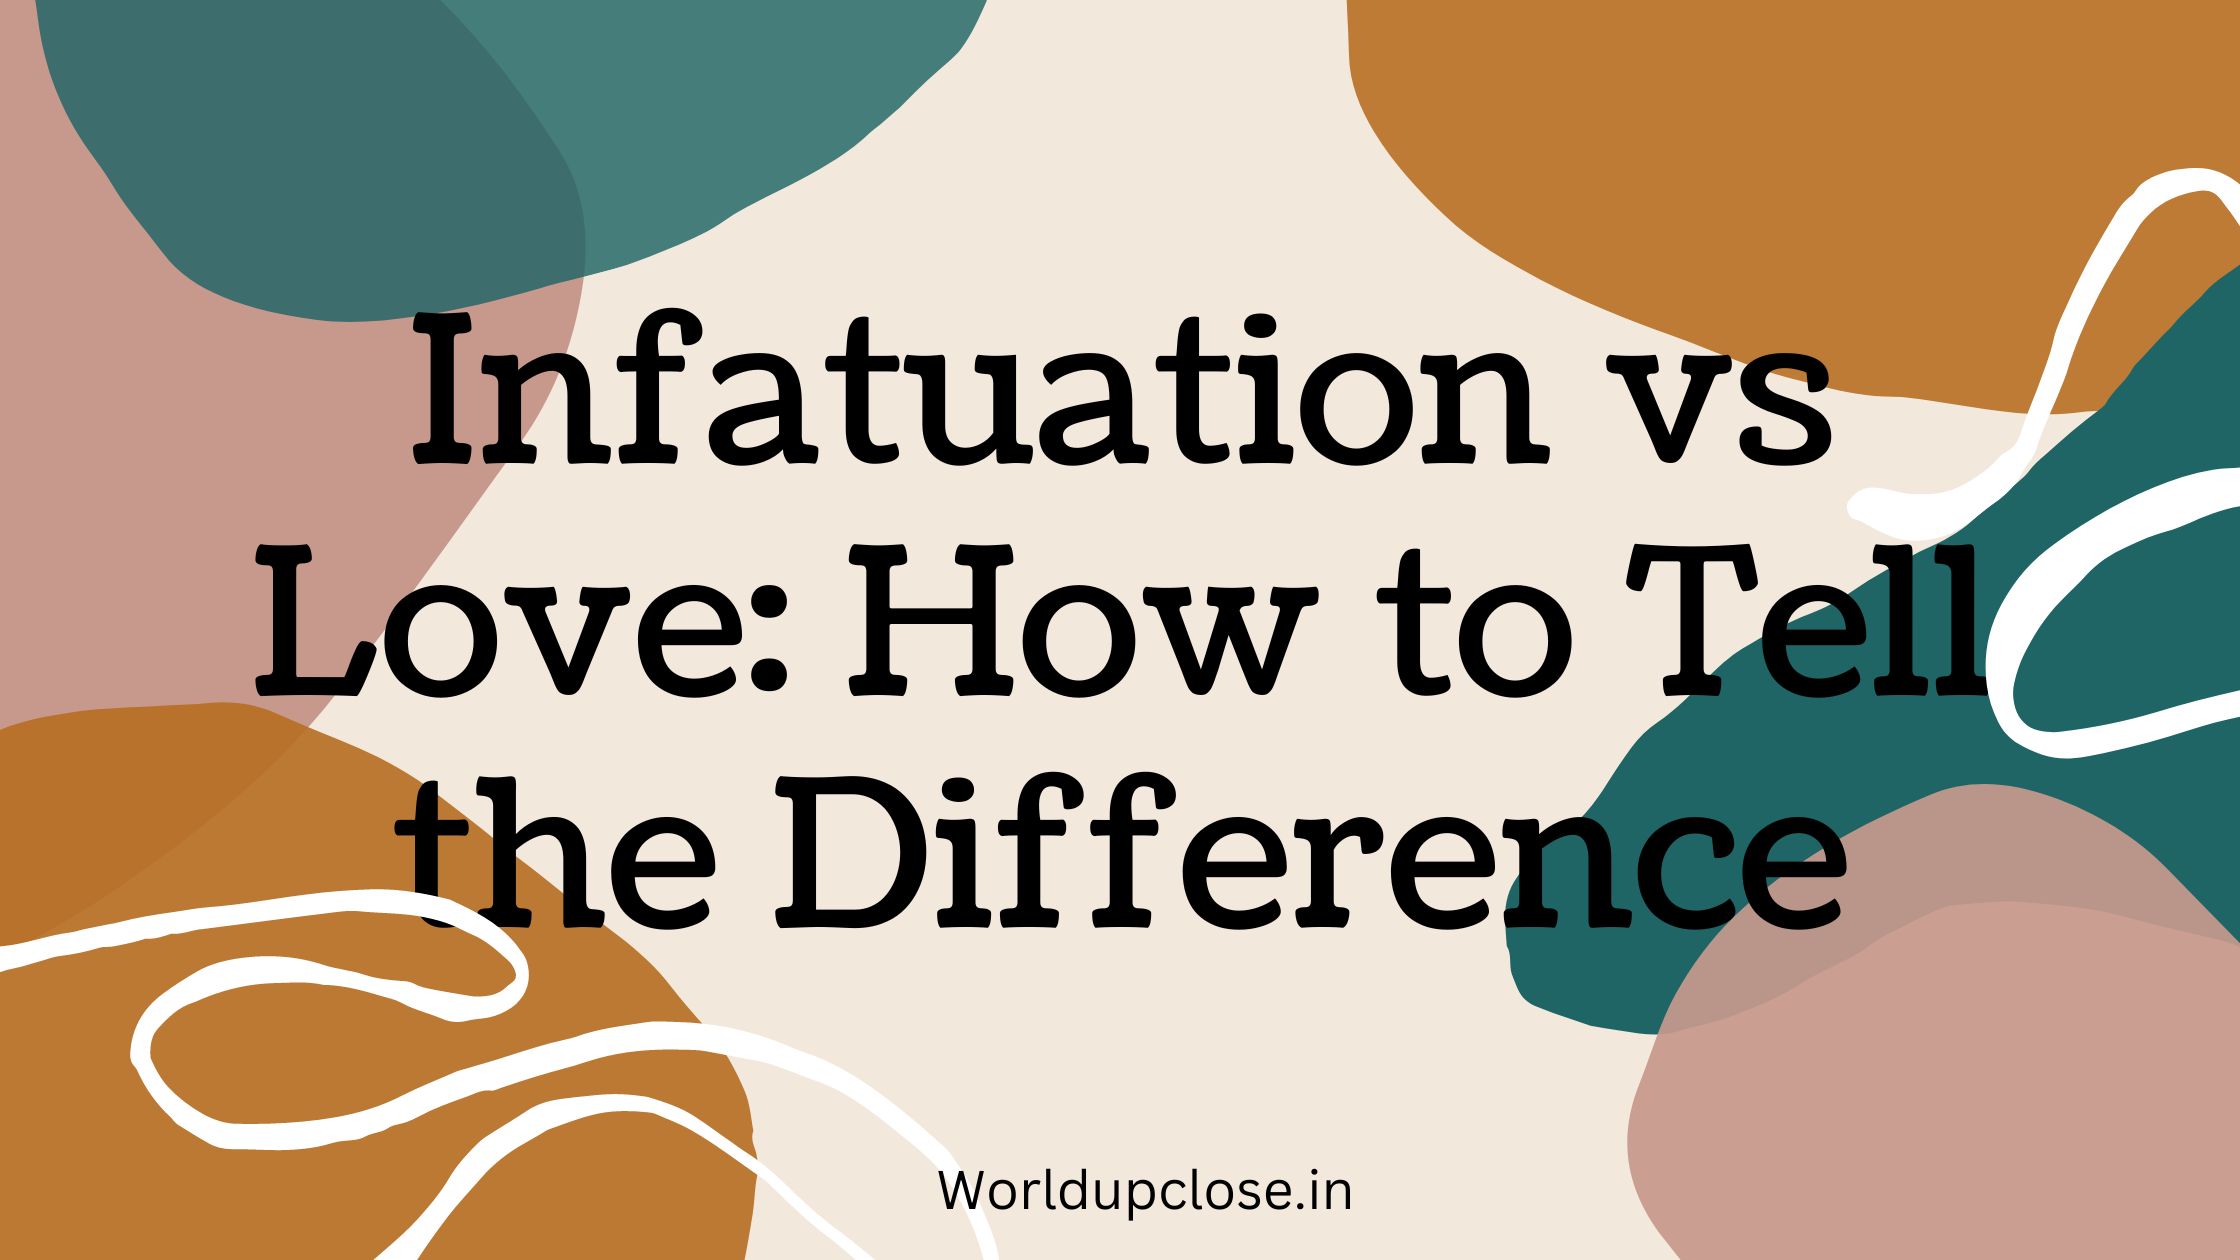 Infatuation vs Love: How to Tell the Difference 3